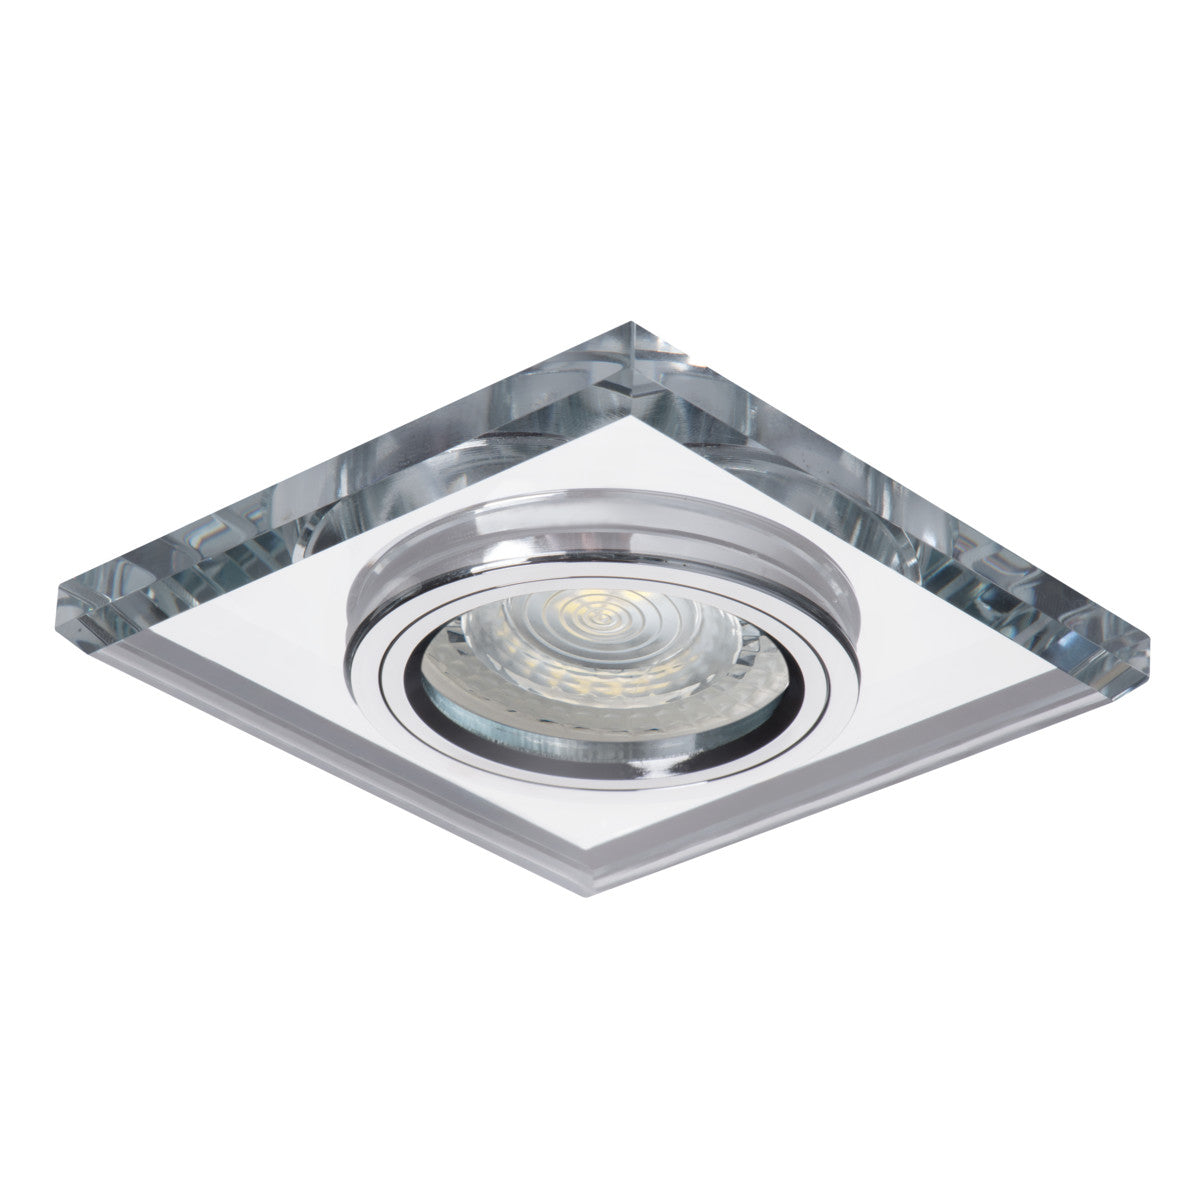 Kanlux MORTA Square Ceiling Recessed Mounted GU10 Decorative Spot Light Fitting